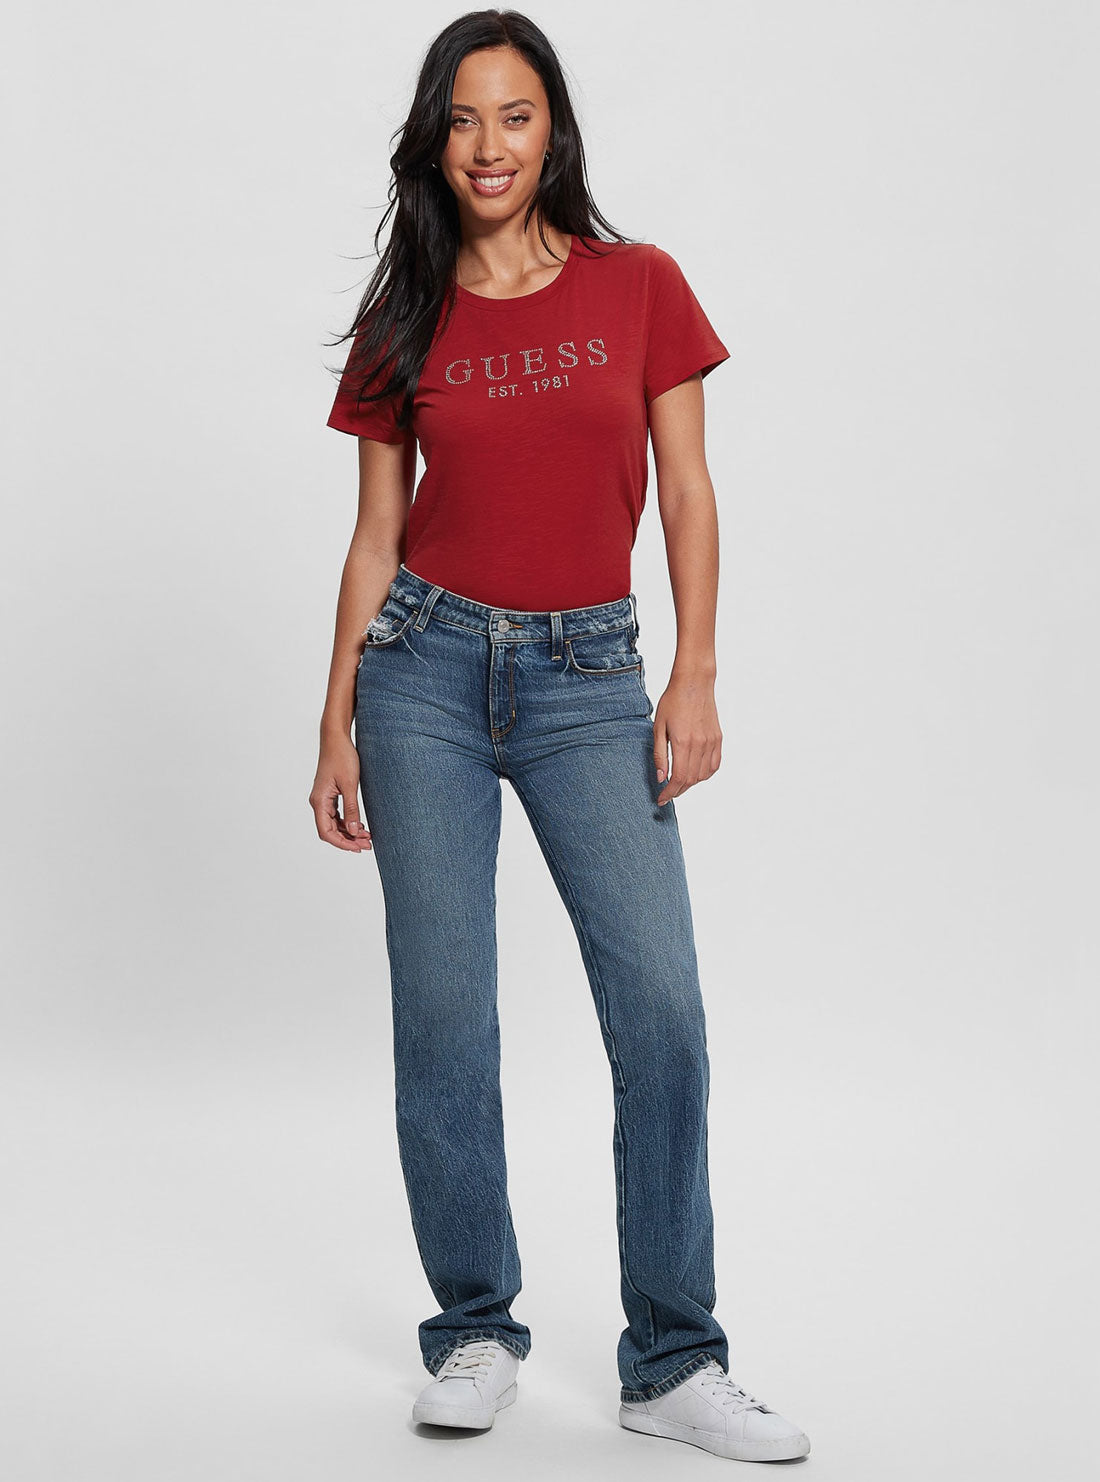 Eco Red 1981 Crystal logo T-Shirt | GUESS Women's Apparel | full view